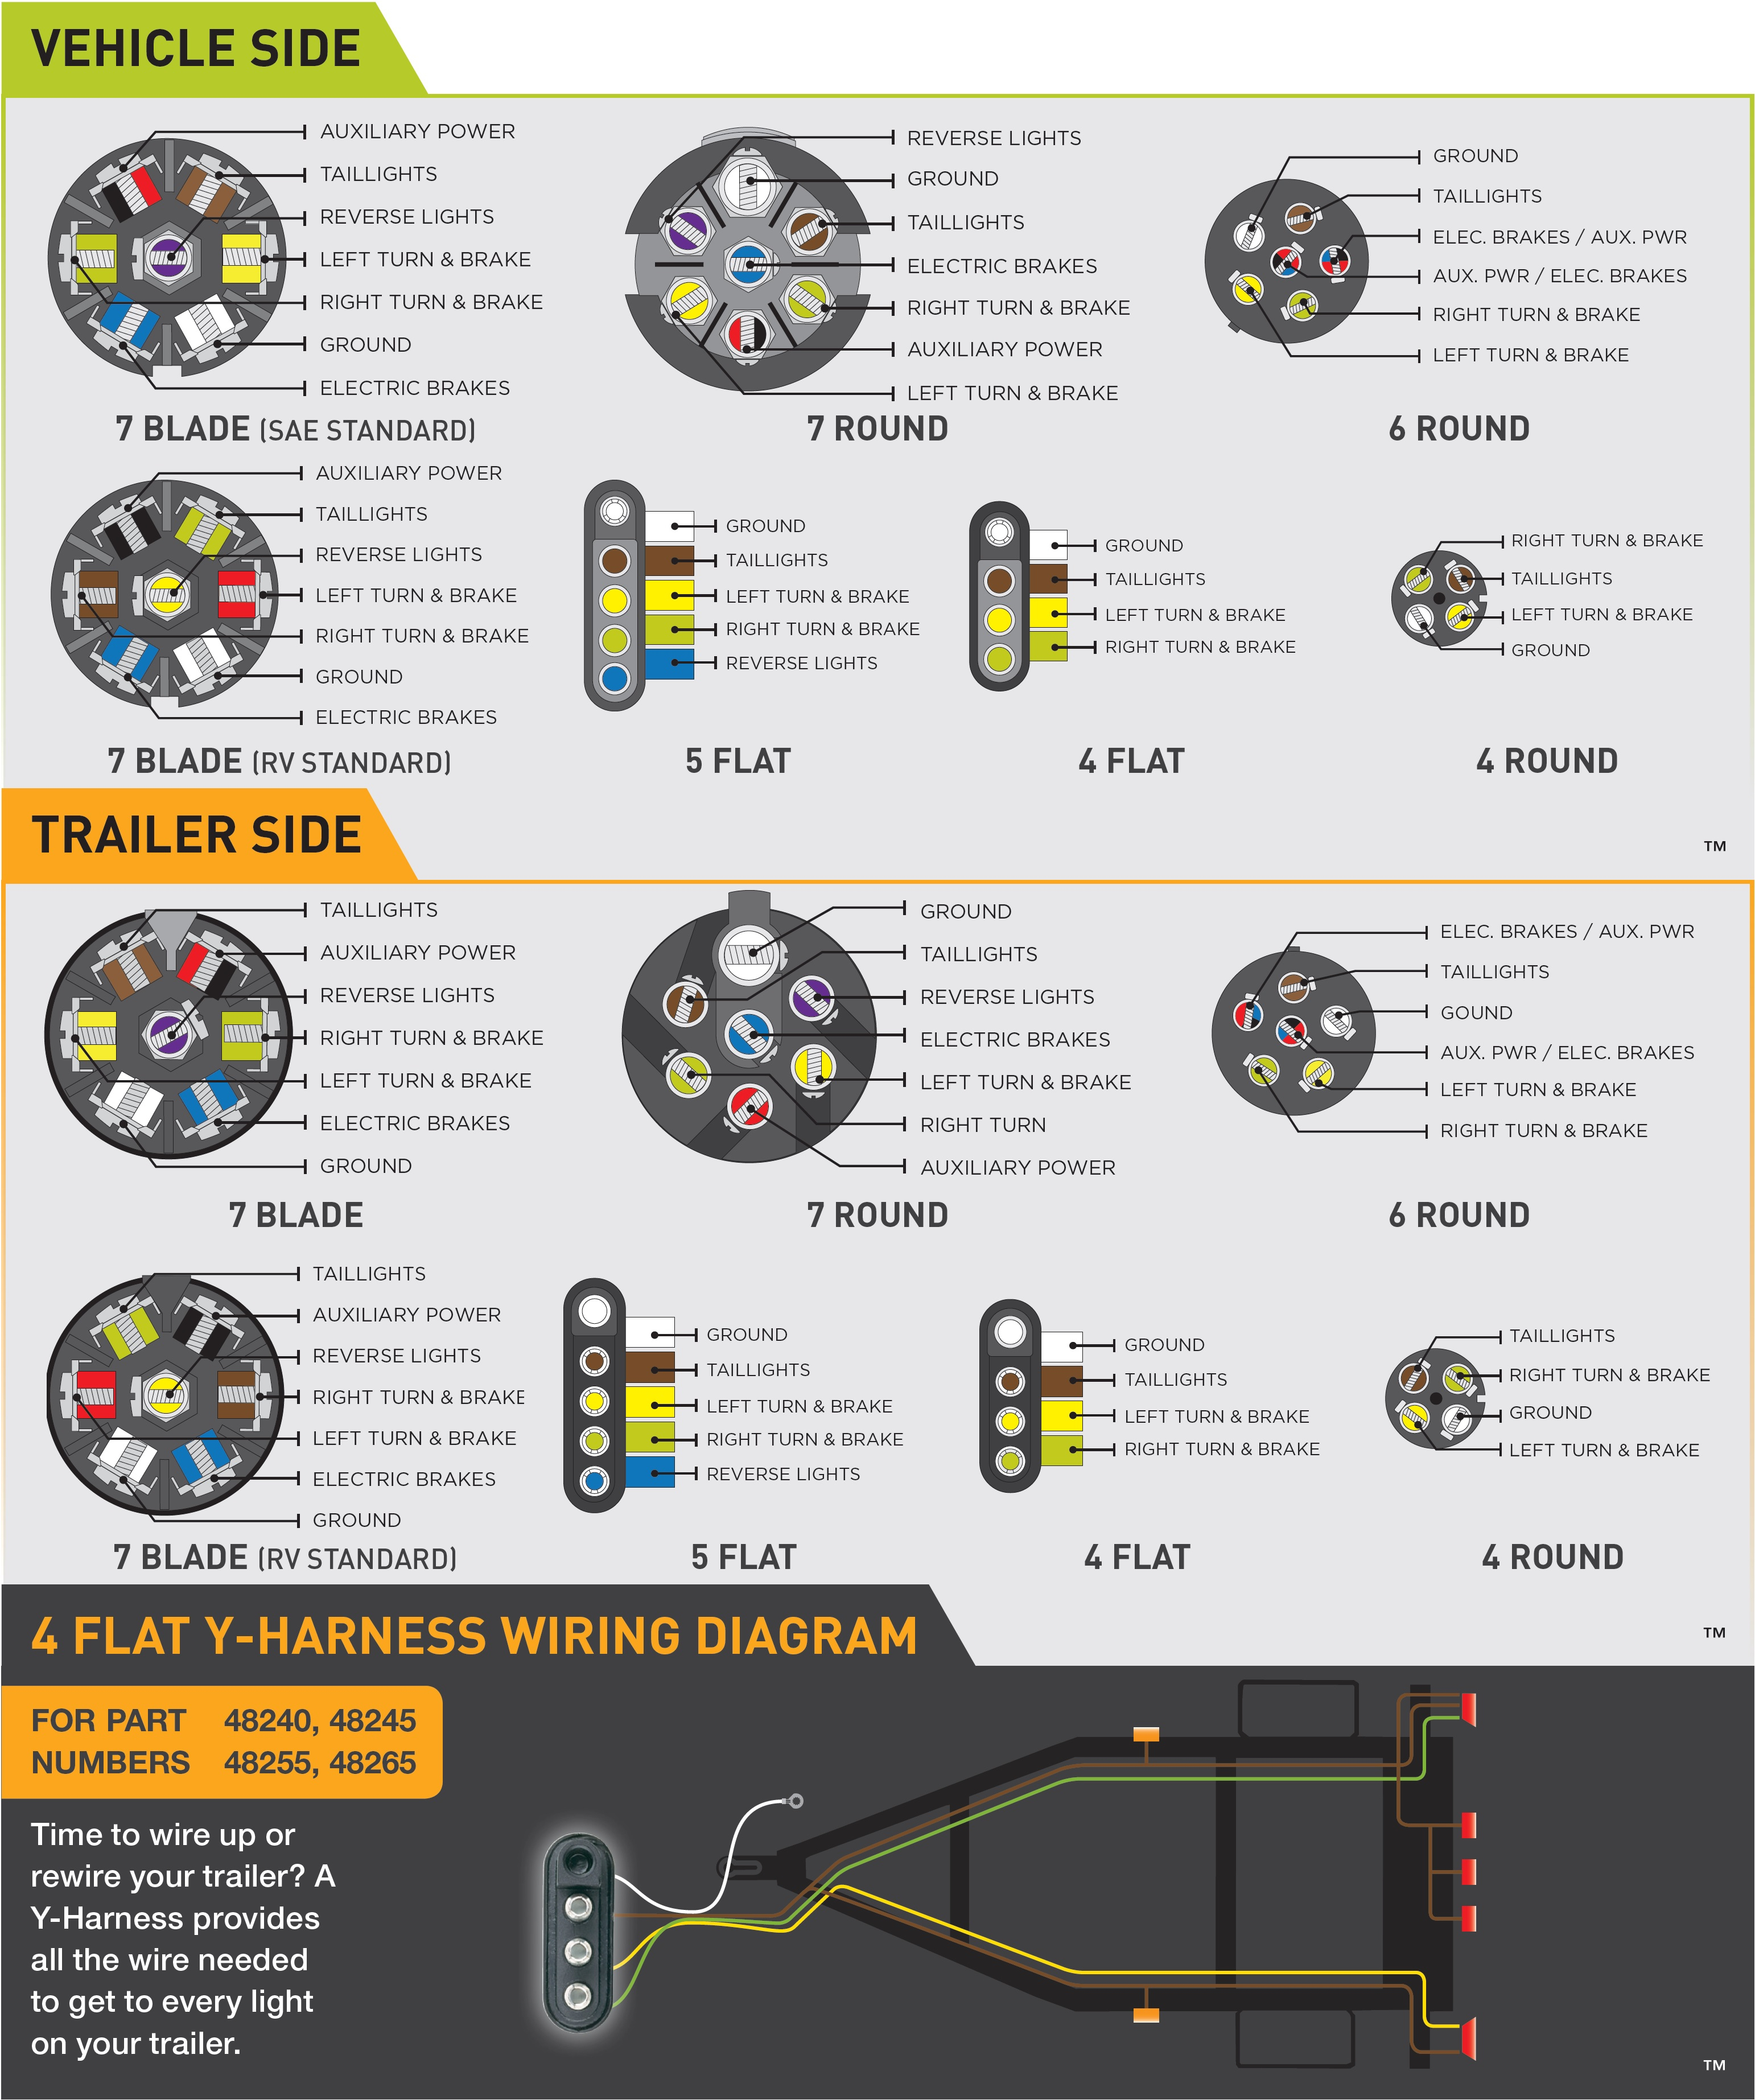 Wiring Guides - Wiring Diagram For Trailer Lights